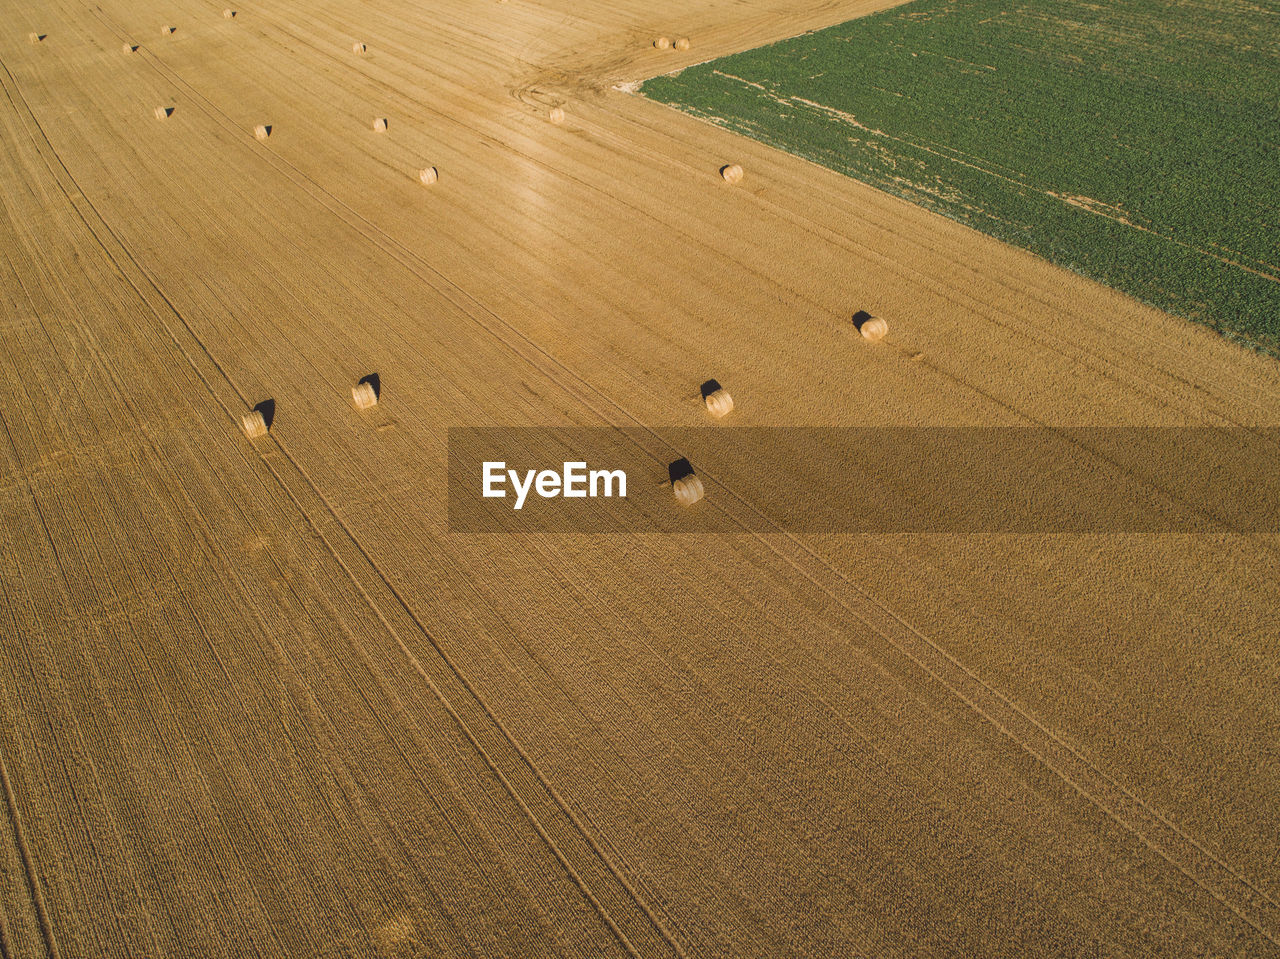 High angle aerial shot of hay bales on agricultural field